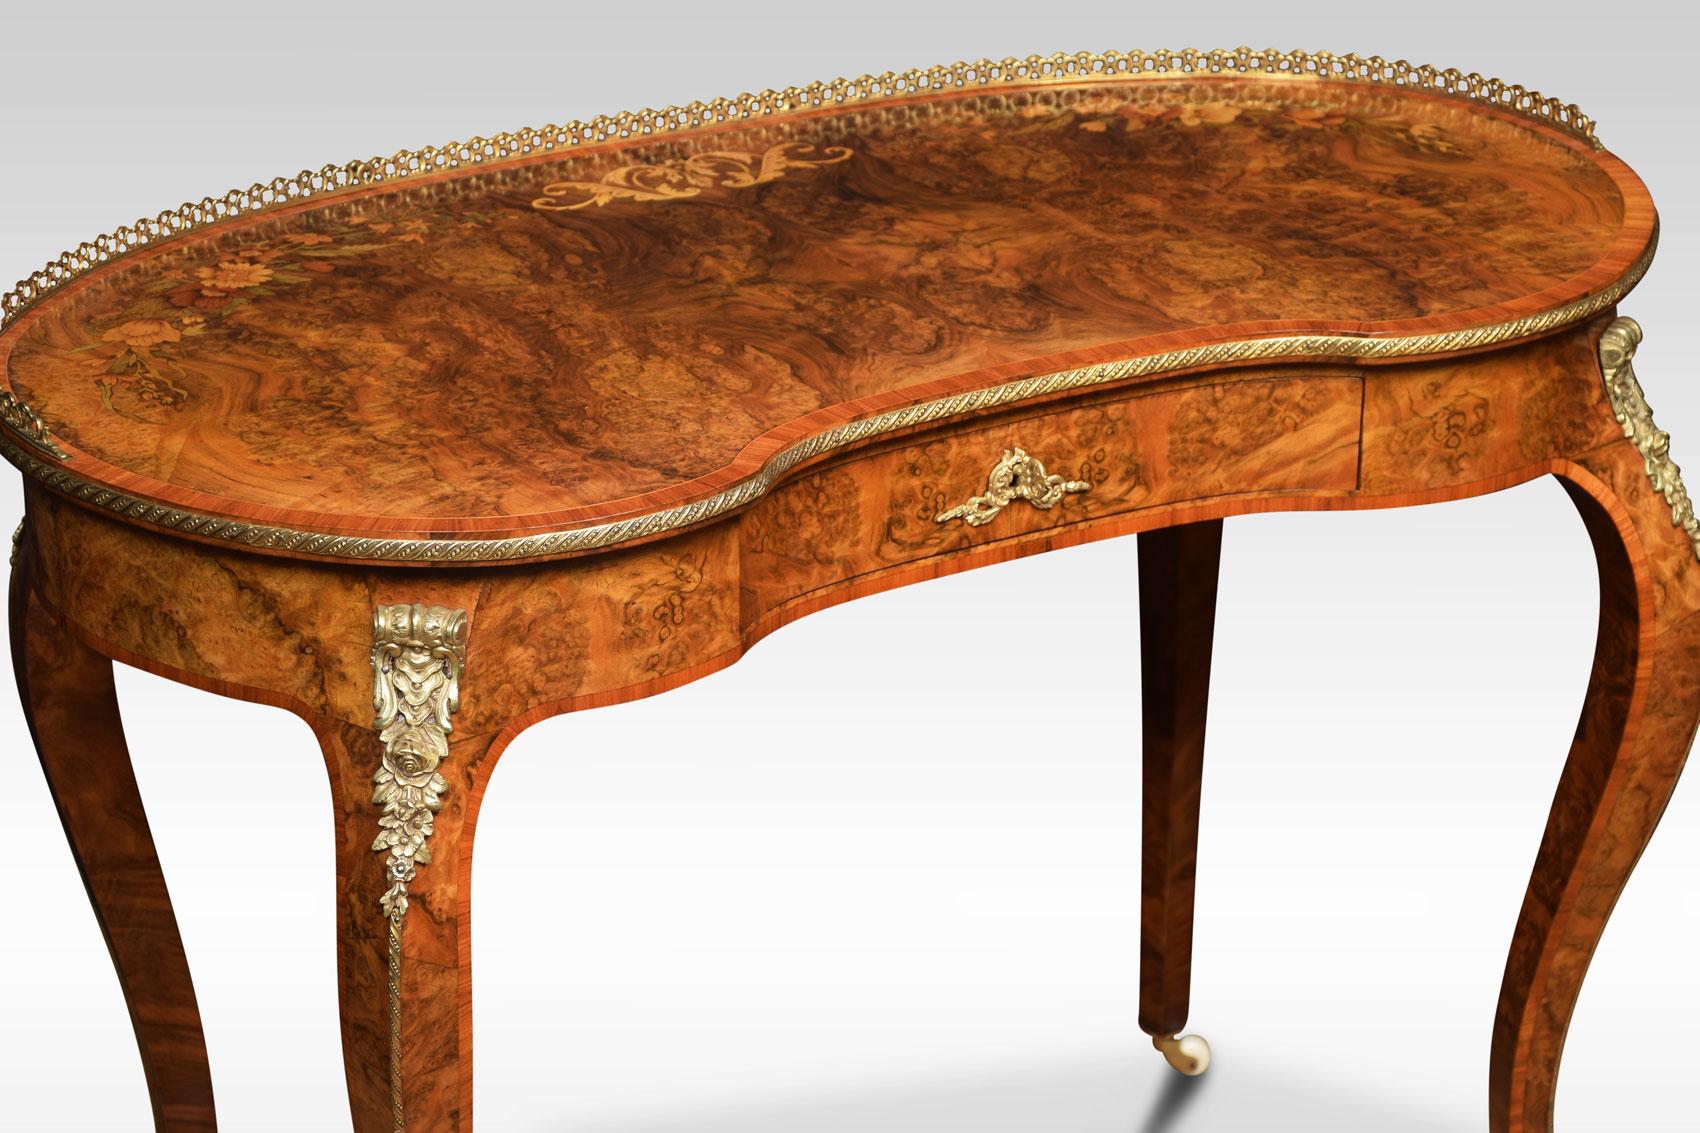 19th century burr walnut and marquetry kidney-shaped table the raised three quarter brass gallery to the kidney-shaped top having floral marquetry decoration enclosed by tulipwood banding. To the frieze fitted with central drawer all raised up on